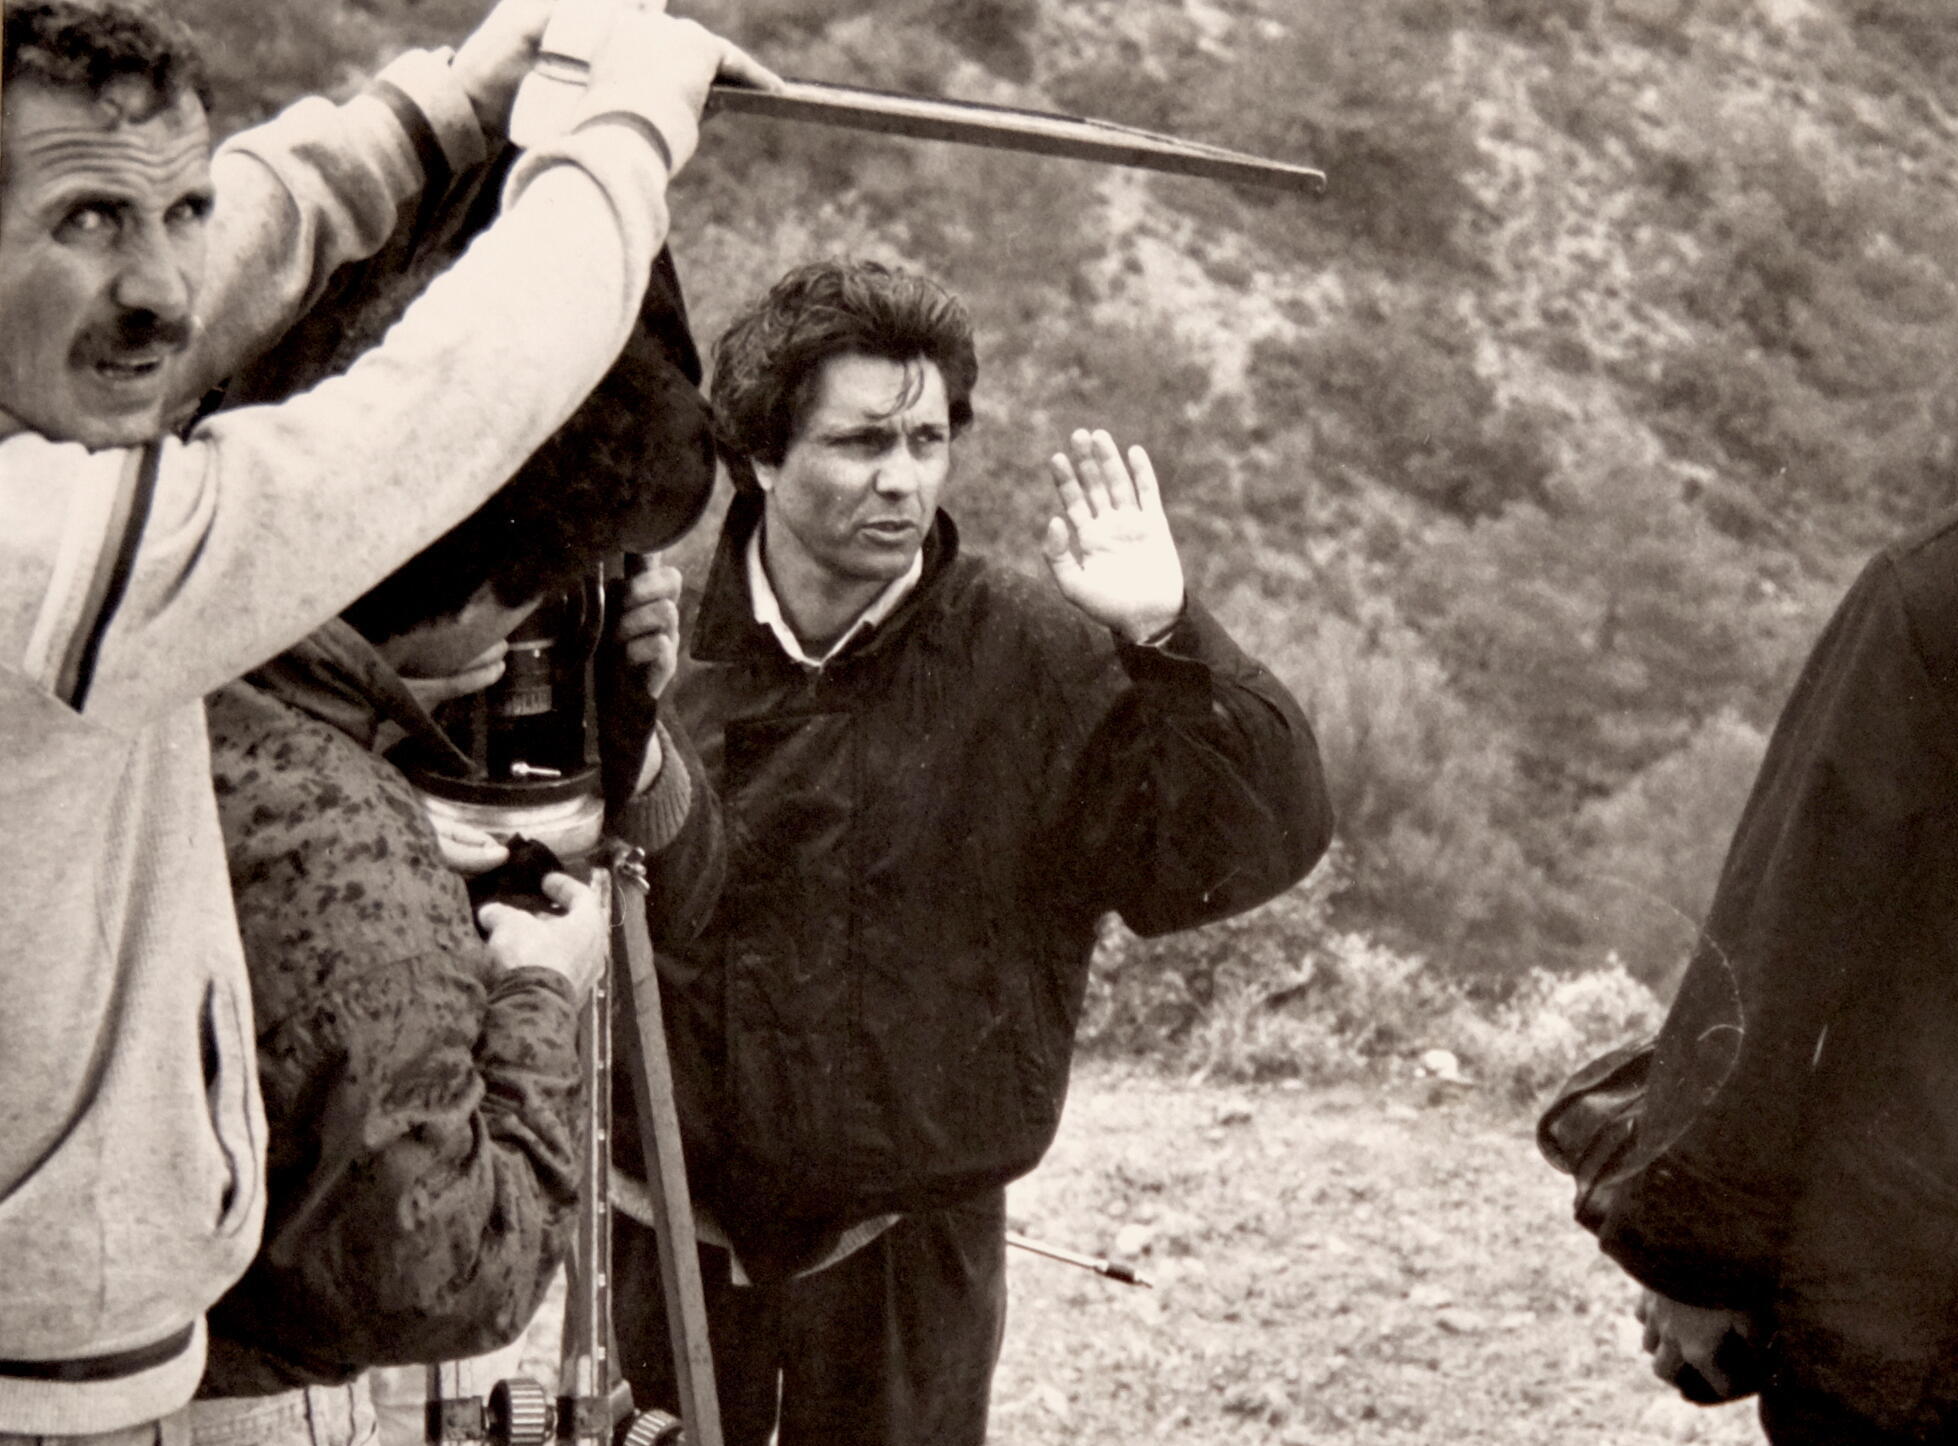 A black and white image of a camera crew shooting a film in nature.